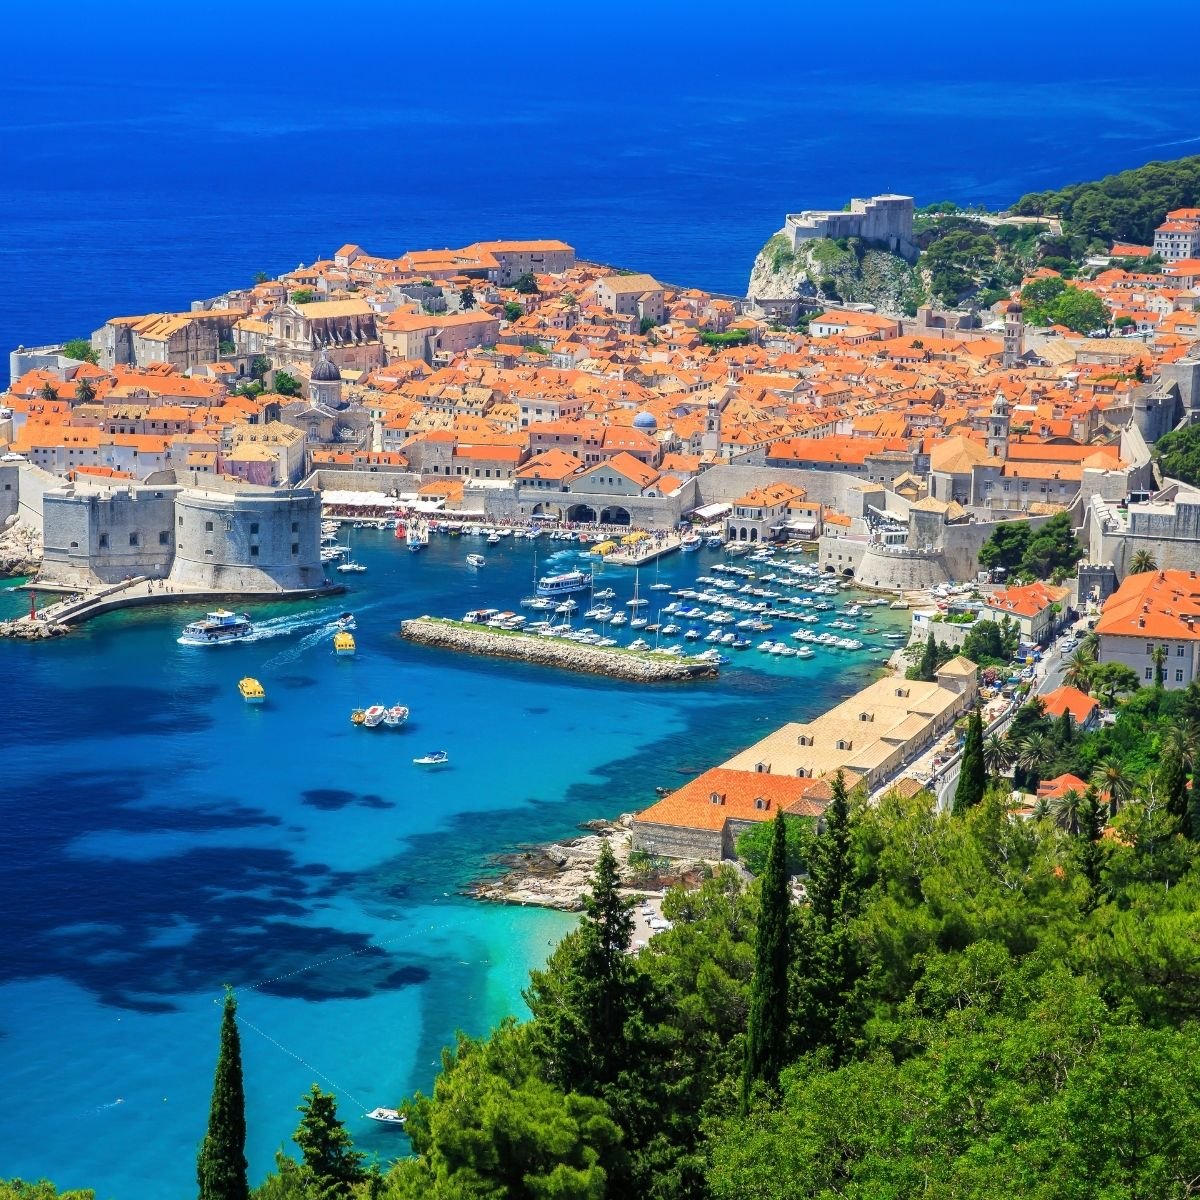 How to Spend 4 Days in Dubrovnik Croatia